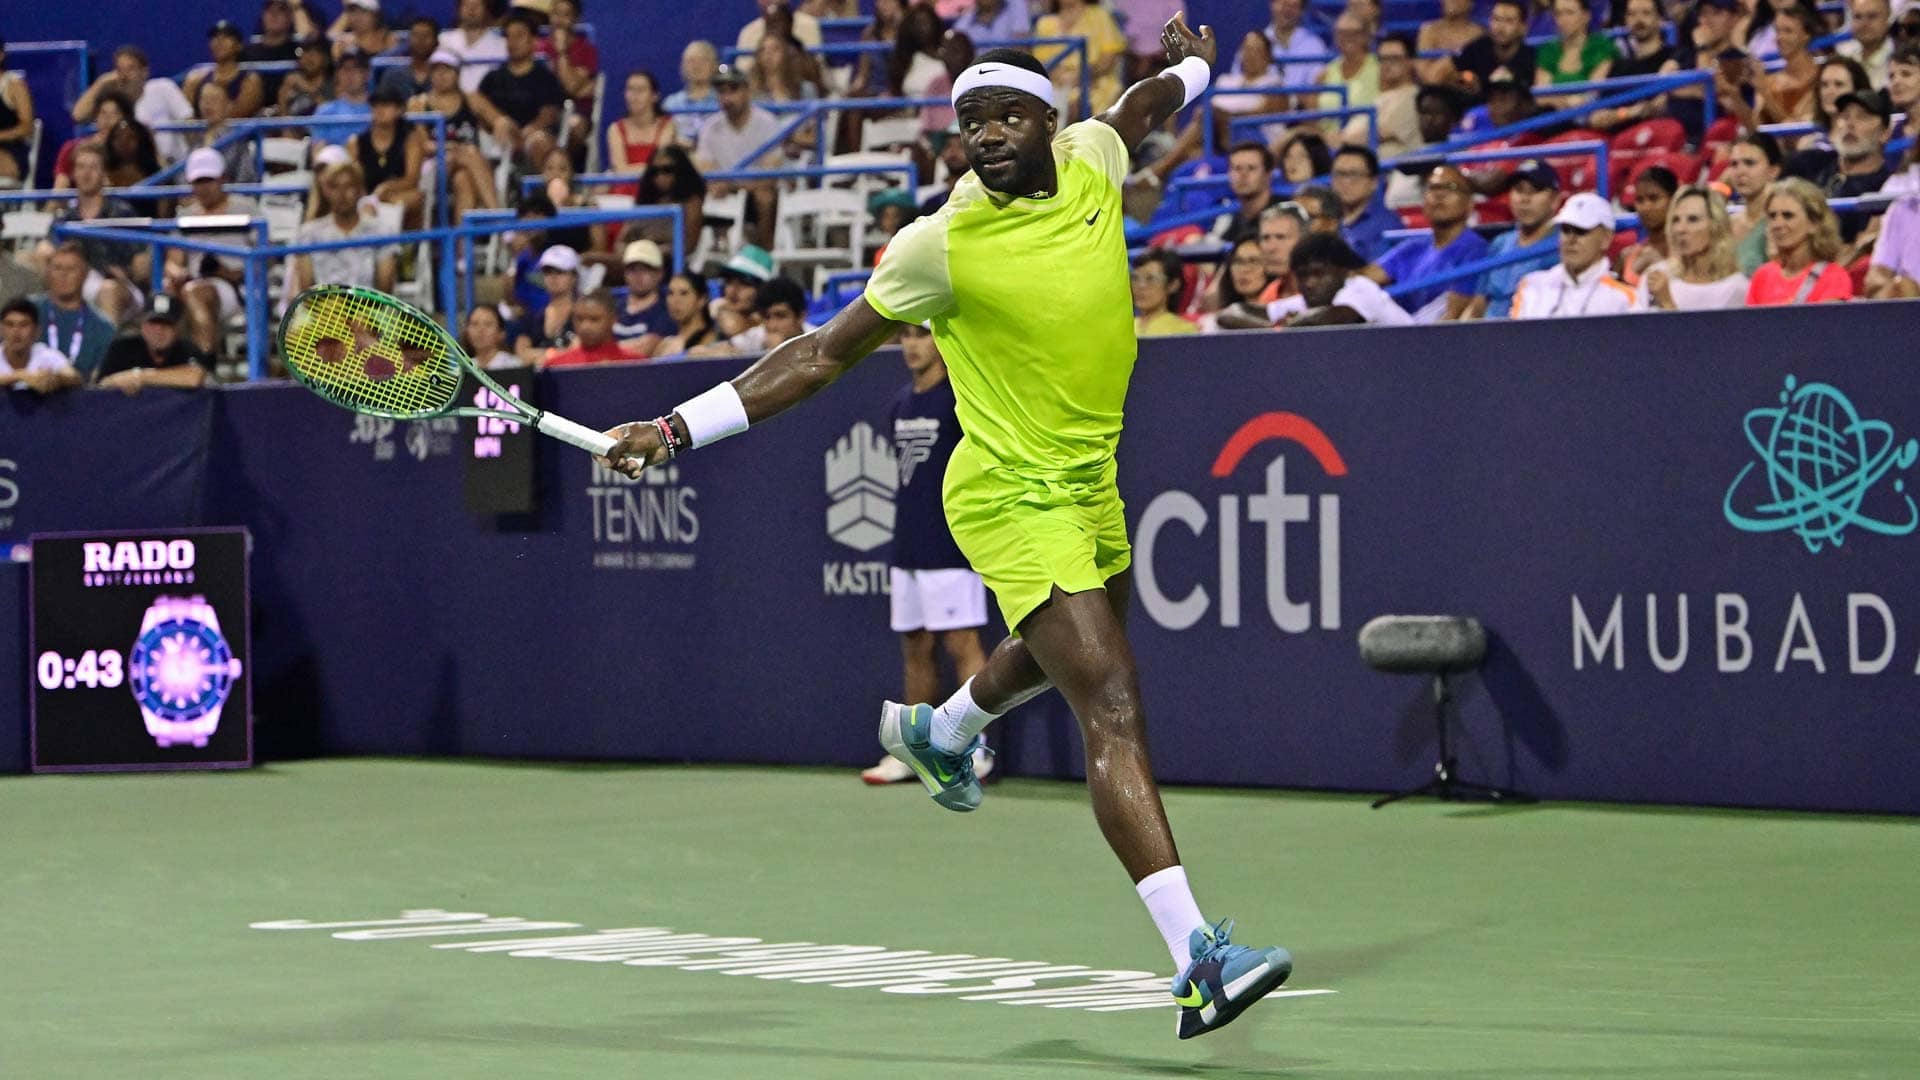 Friday Night 'Foe: Tiafoe upsets Rublev in front of raucous Washington crowd